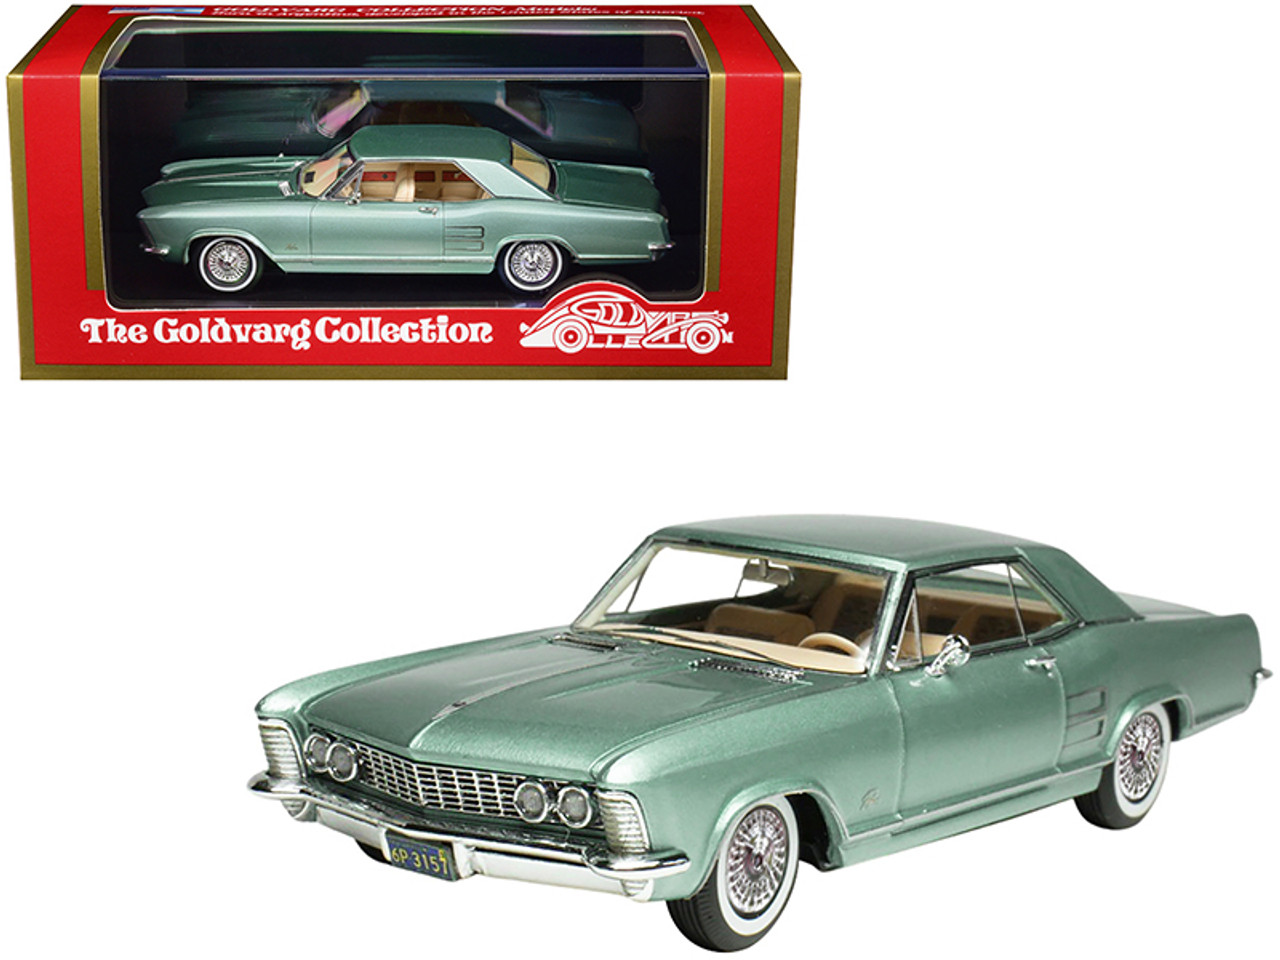 1963 Buick Riviera Light Teal Mist Metallic Limited Edition to 250 pieces Worldwide 1/43 Model Car by Goldvarg Collection